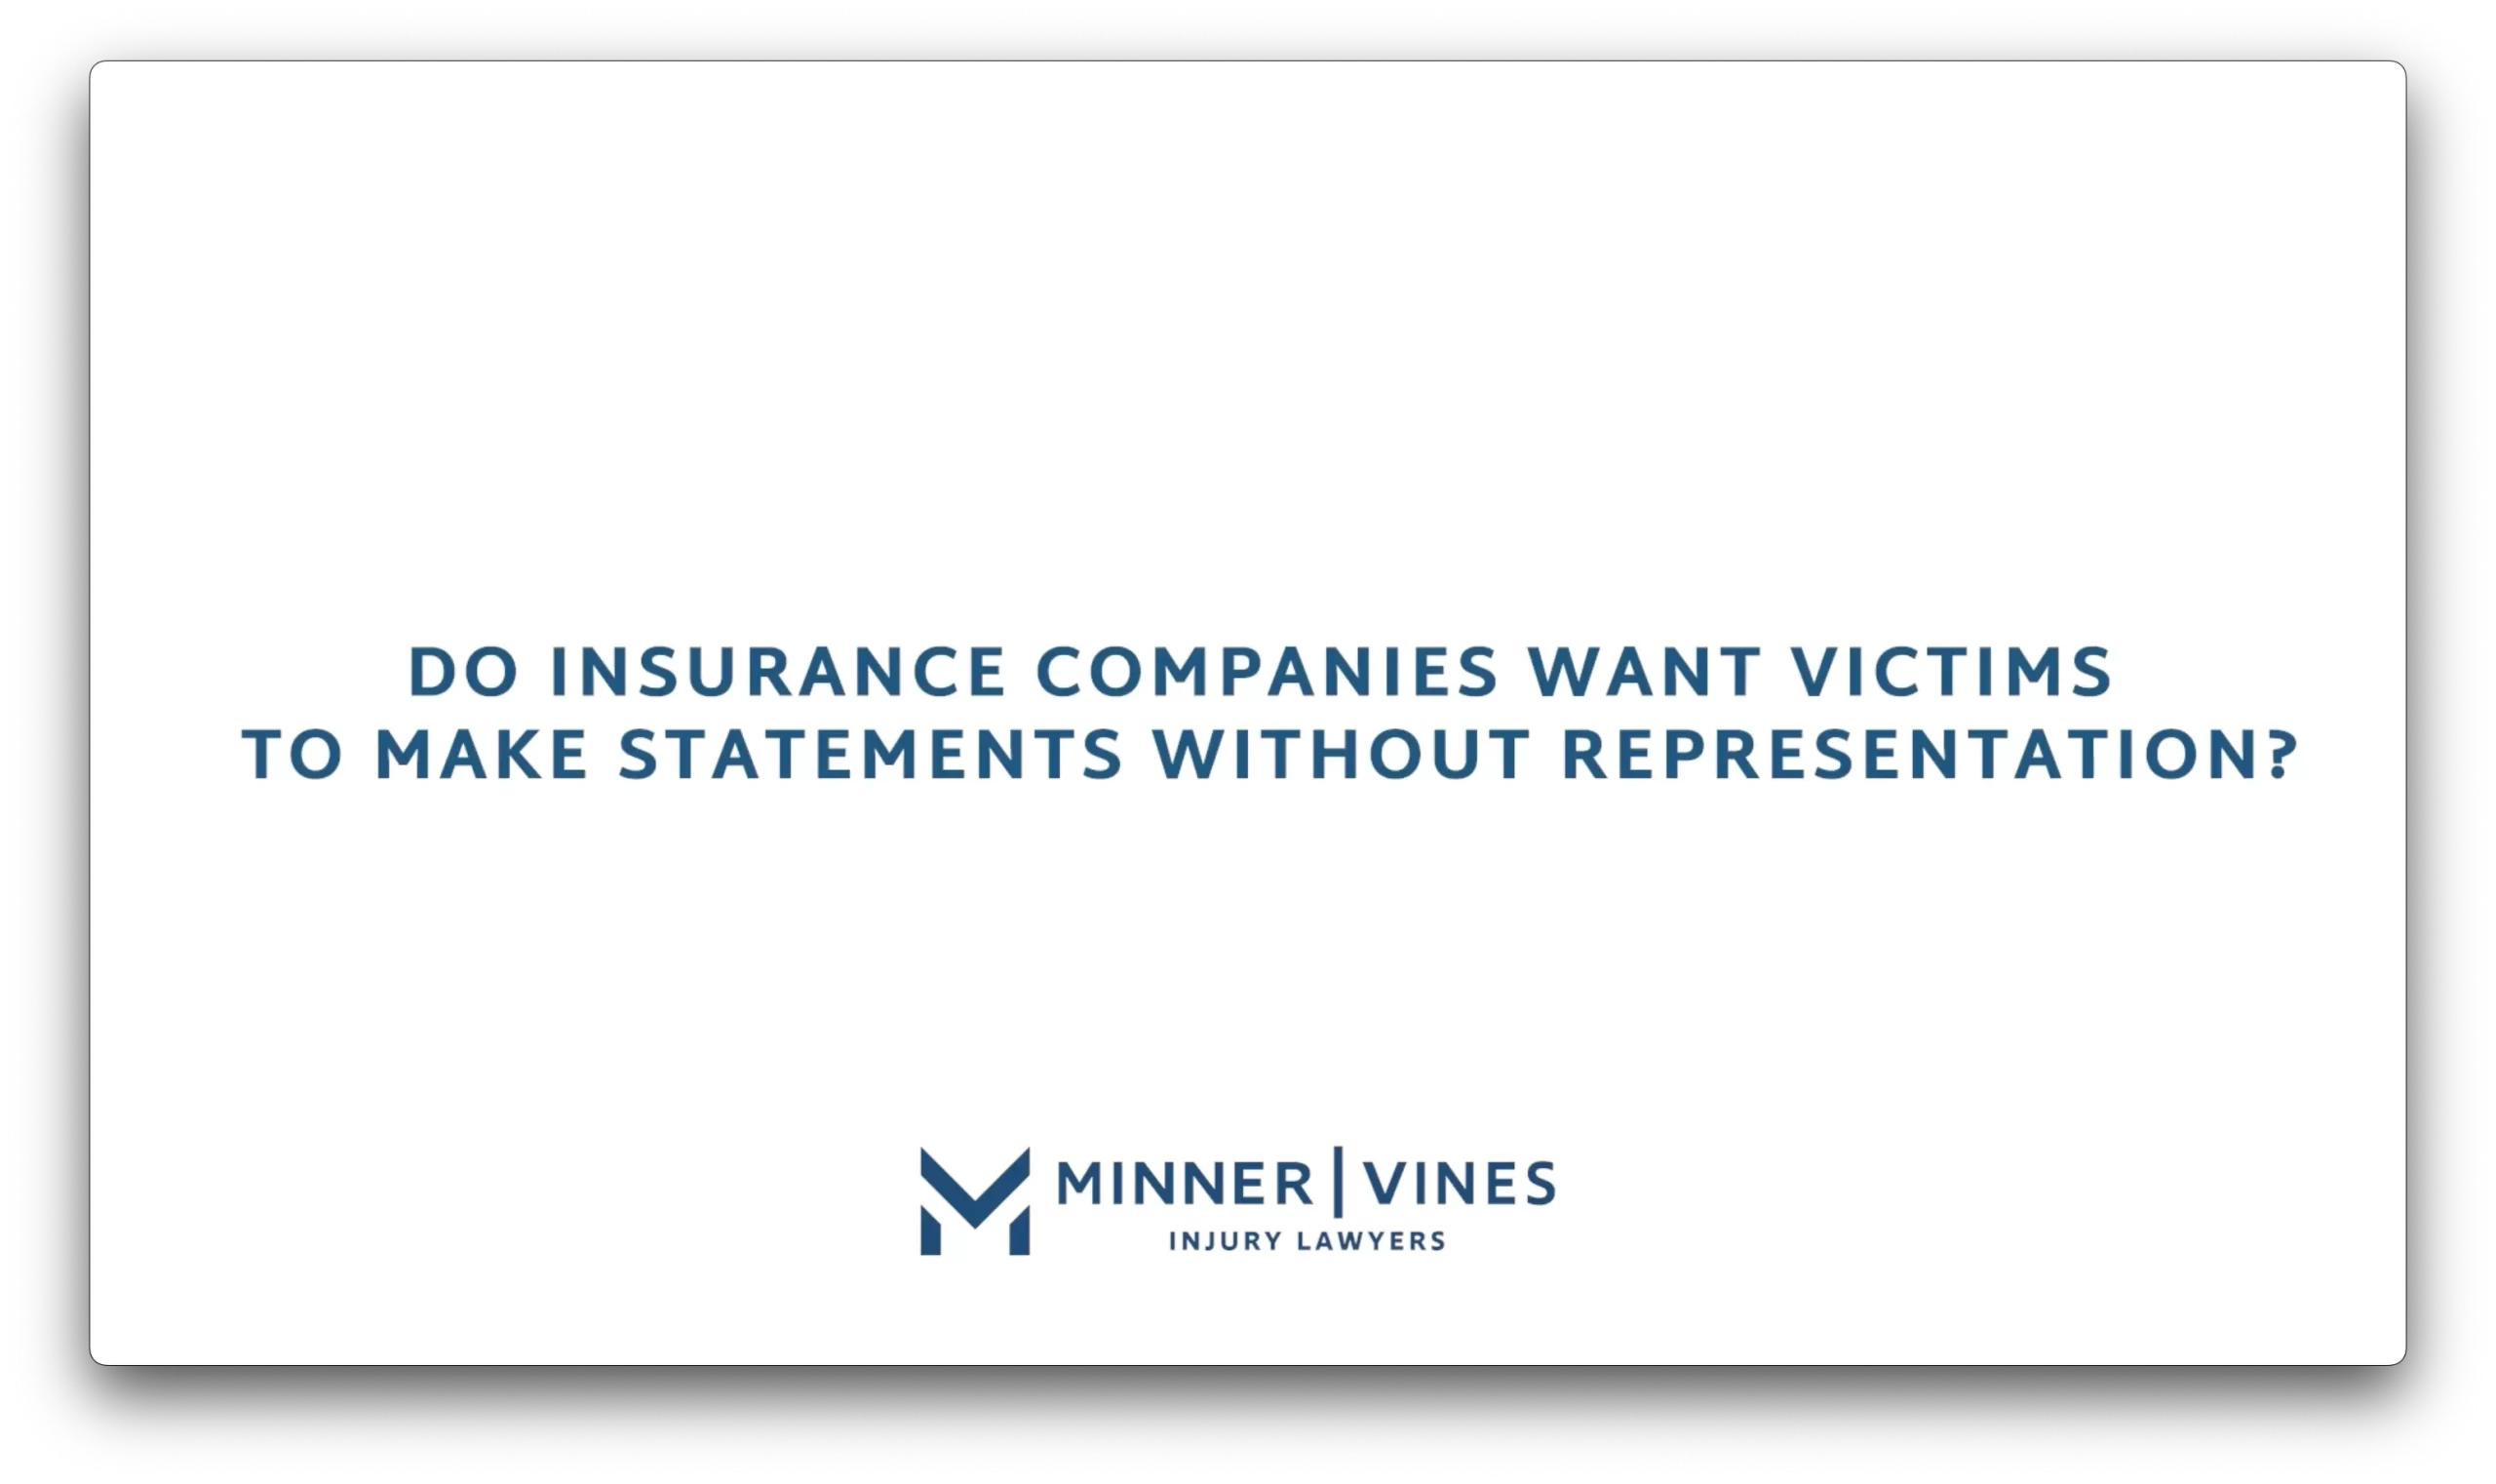 Do insurance companies want victims to make statements without representation?